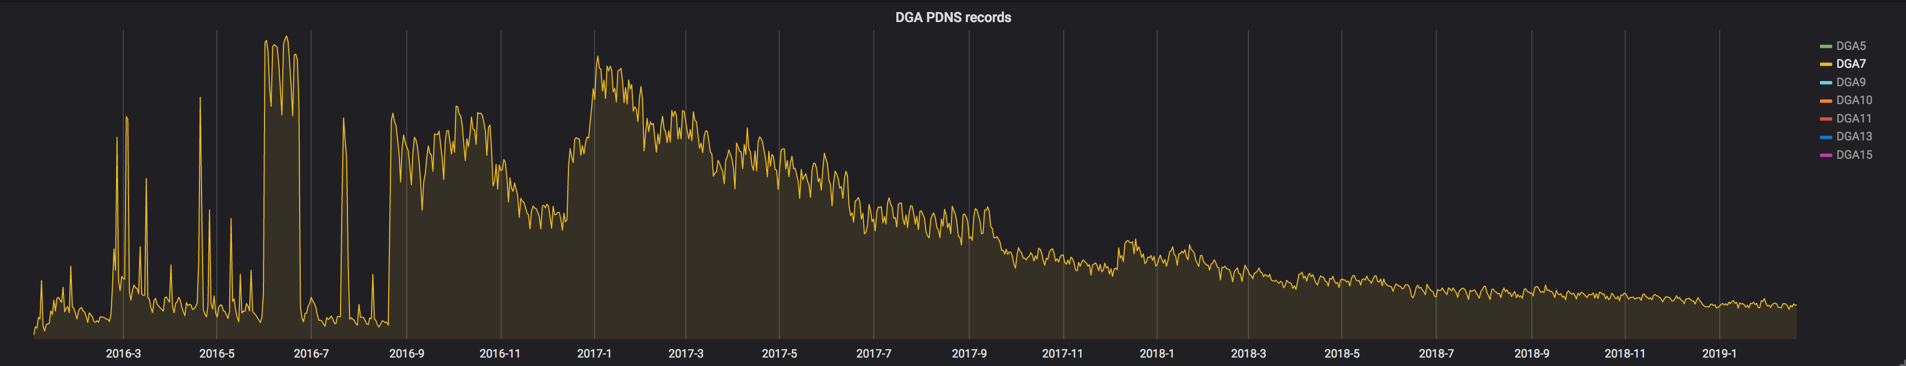 Picture6_DGA PDNS Records.png